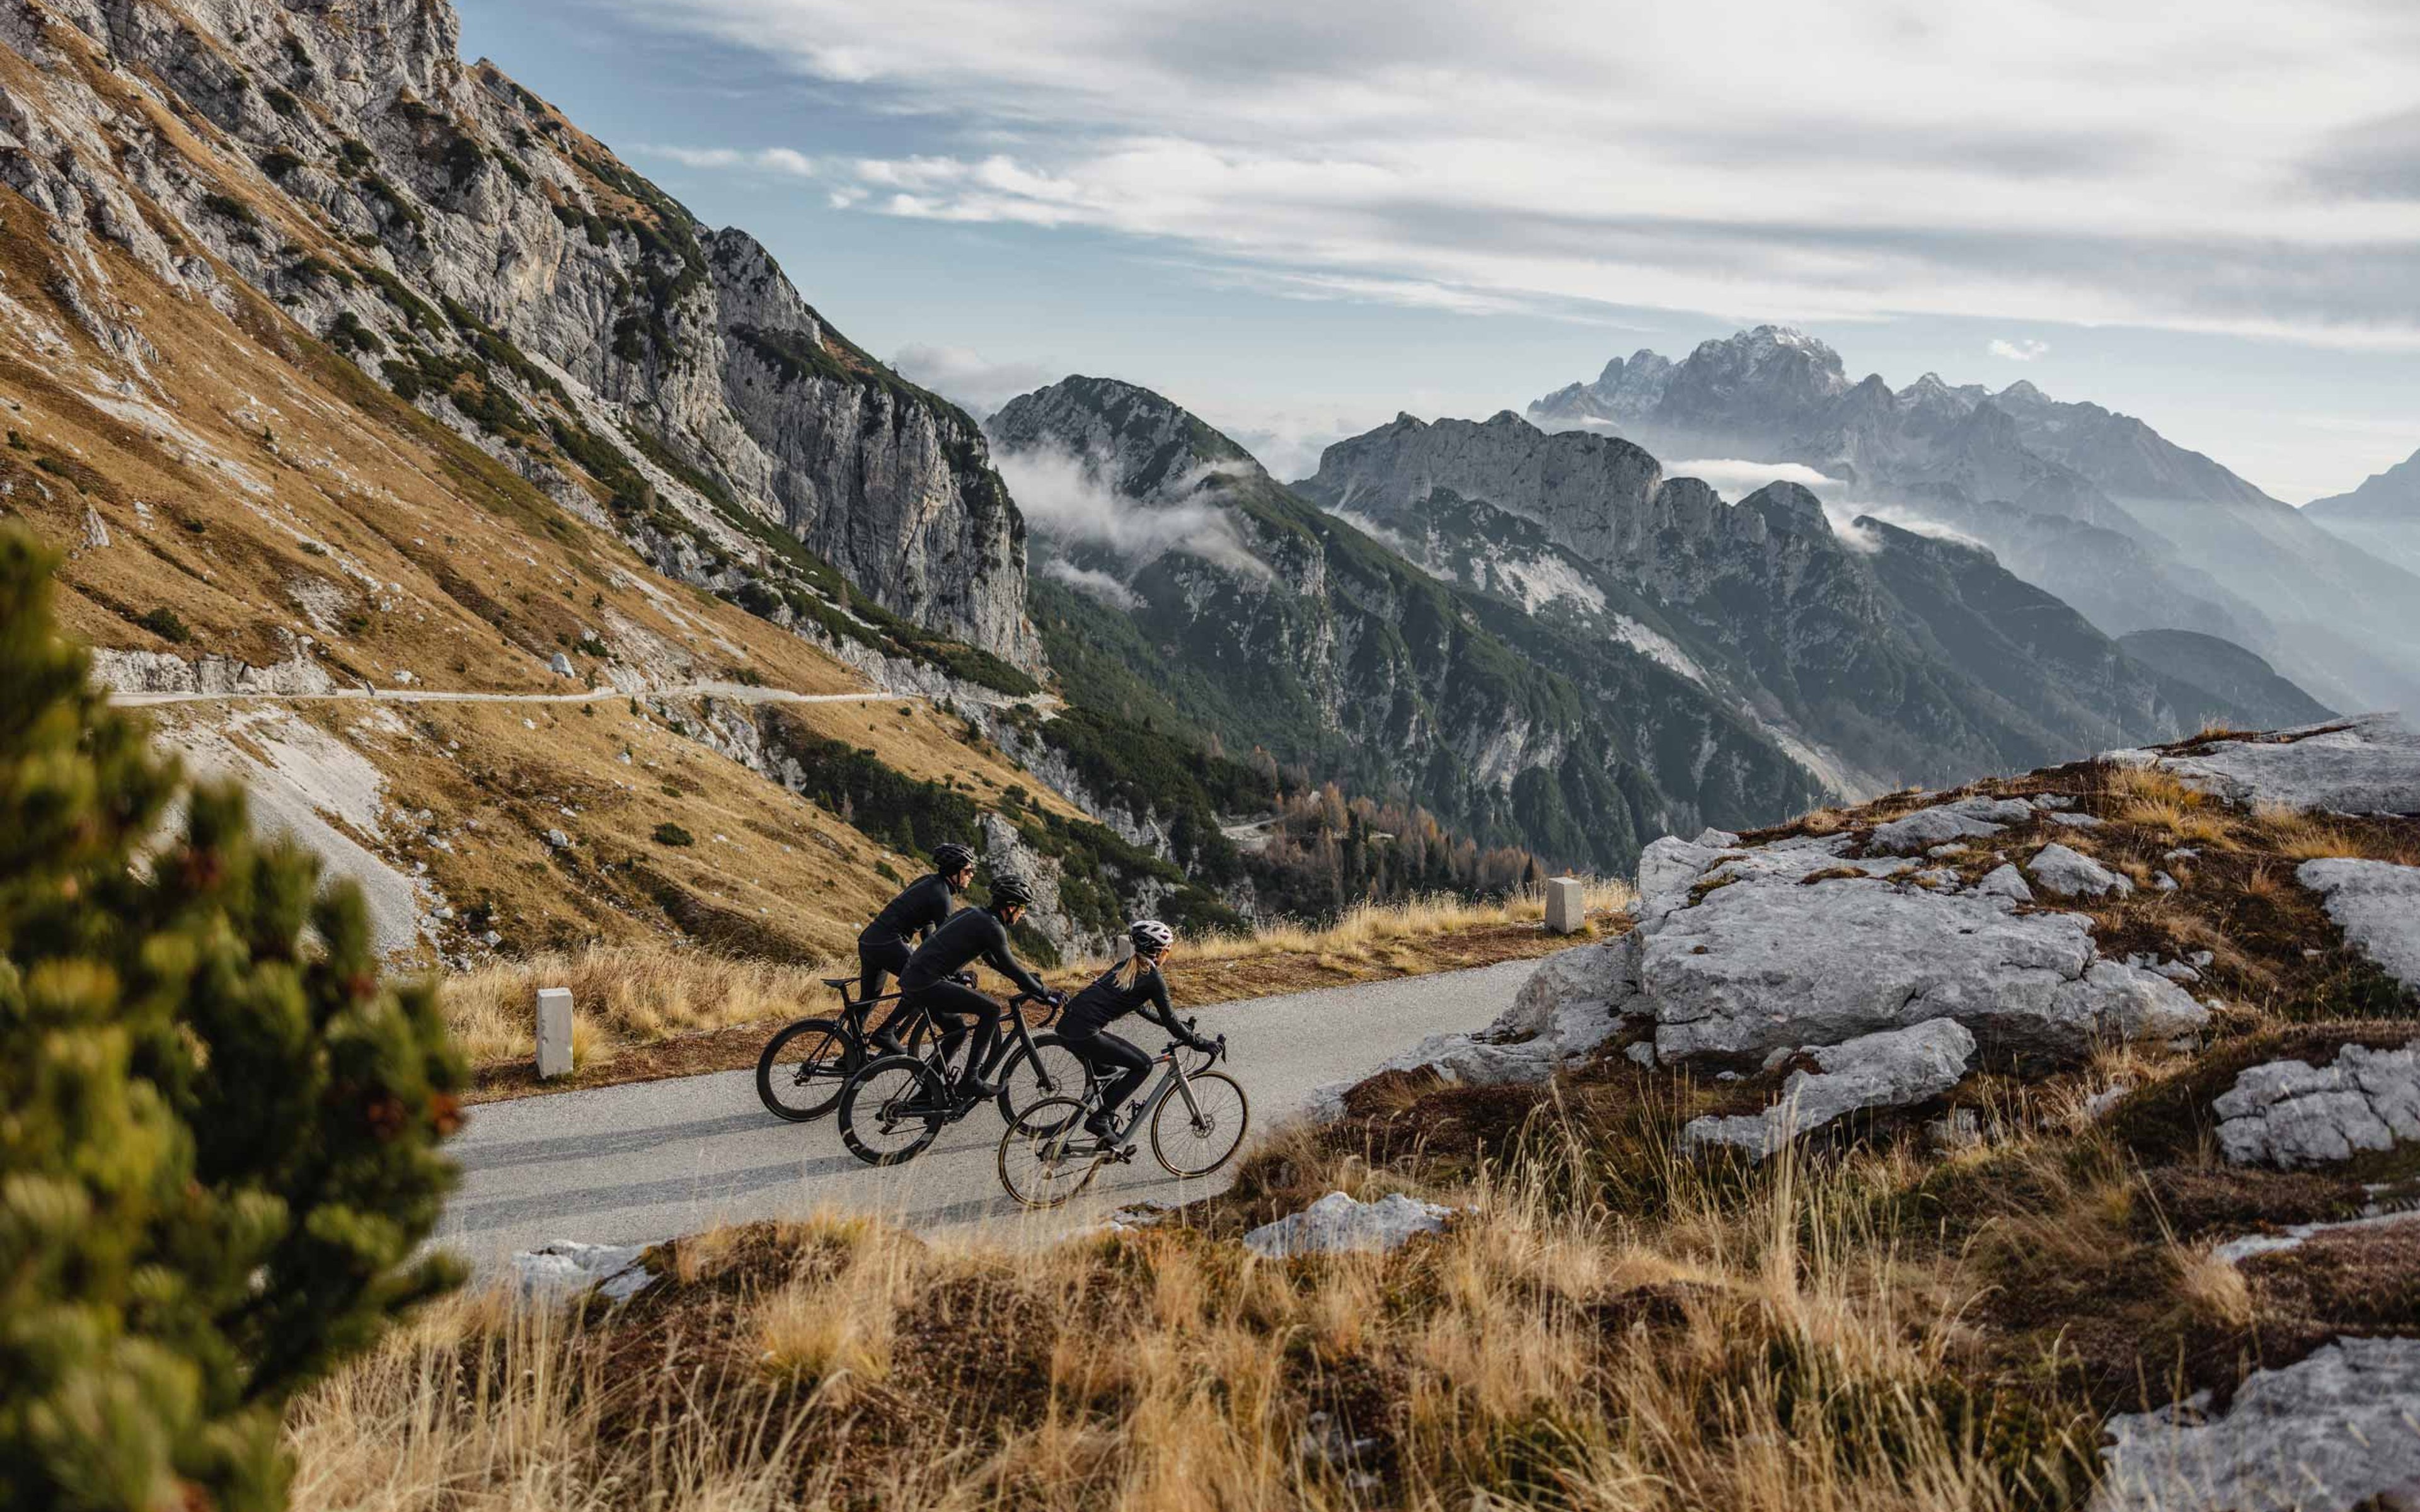 Three intrepid cyclists exploring scenic mountain trails on their high-performance bike.